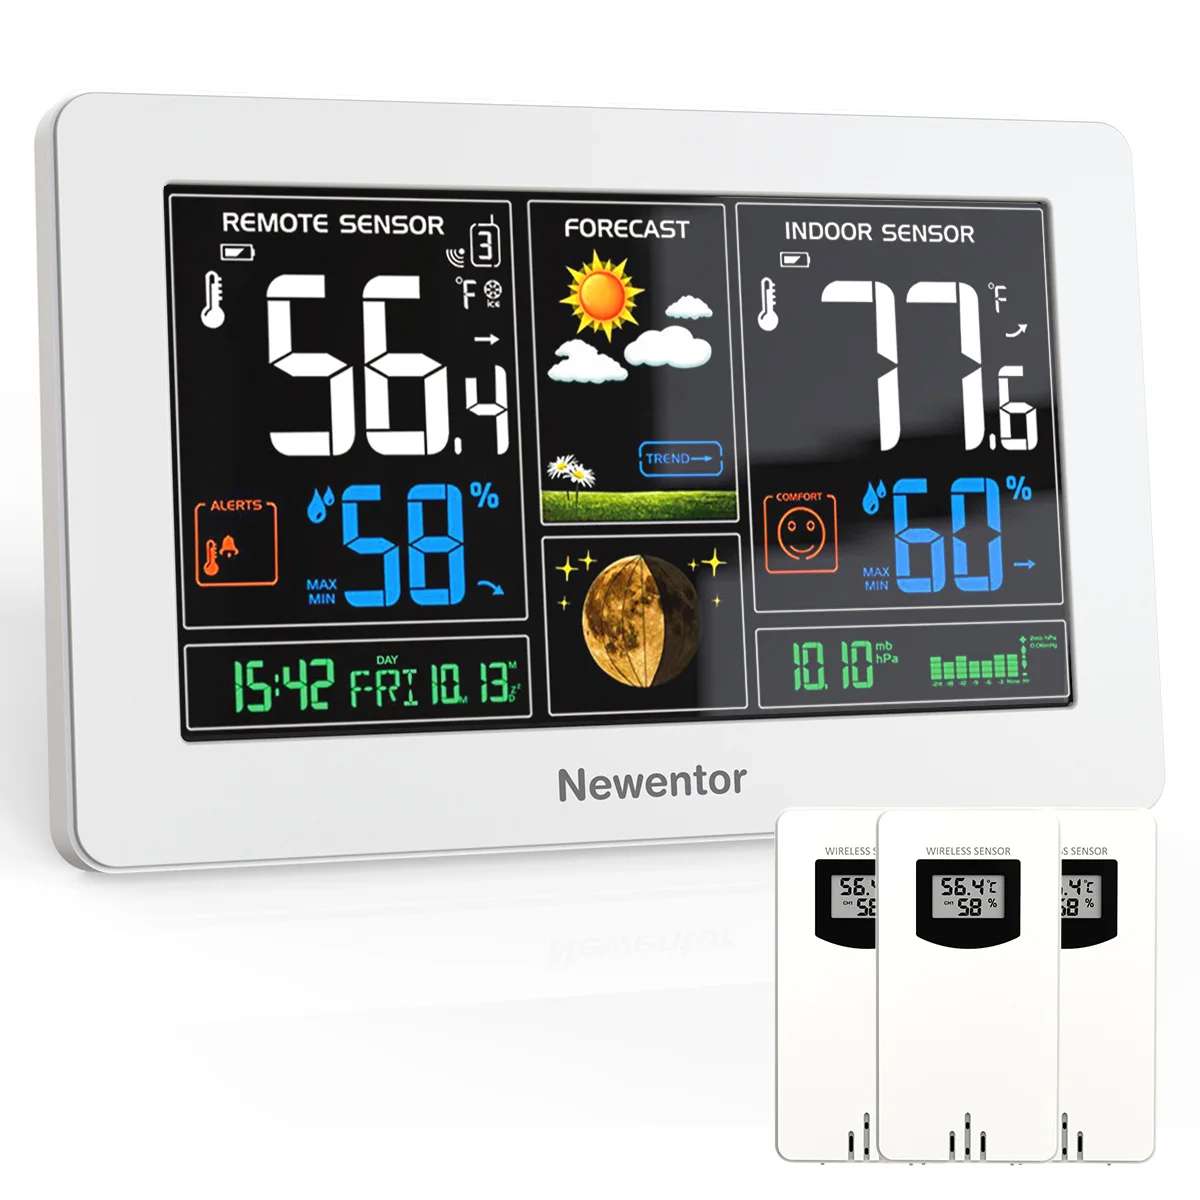 https://ae01.alicdn.com/kf/Seeaf459fb254486b80f3e958f70848cd7/Newentor-Weather-Station-Wireless-Indoor-Outdoor-Thermometer-Color-Display-Weather-With-Barometer-Adjustable-Backlight.jpg